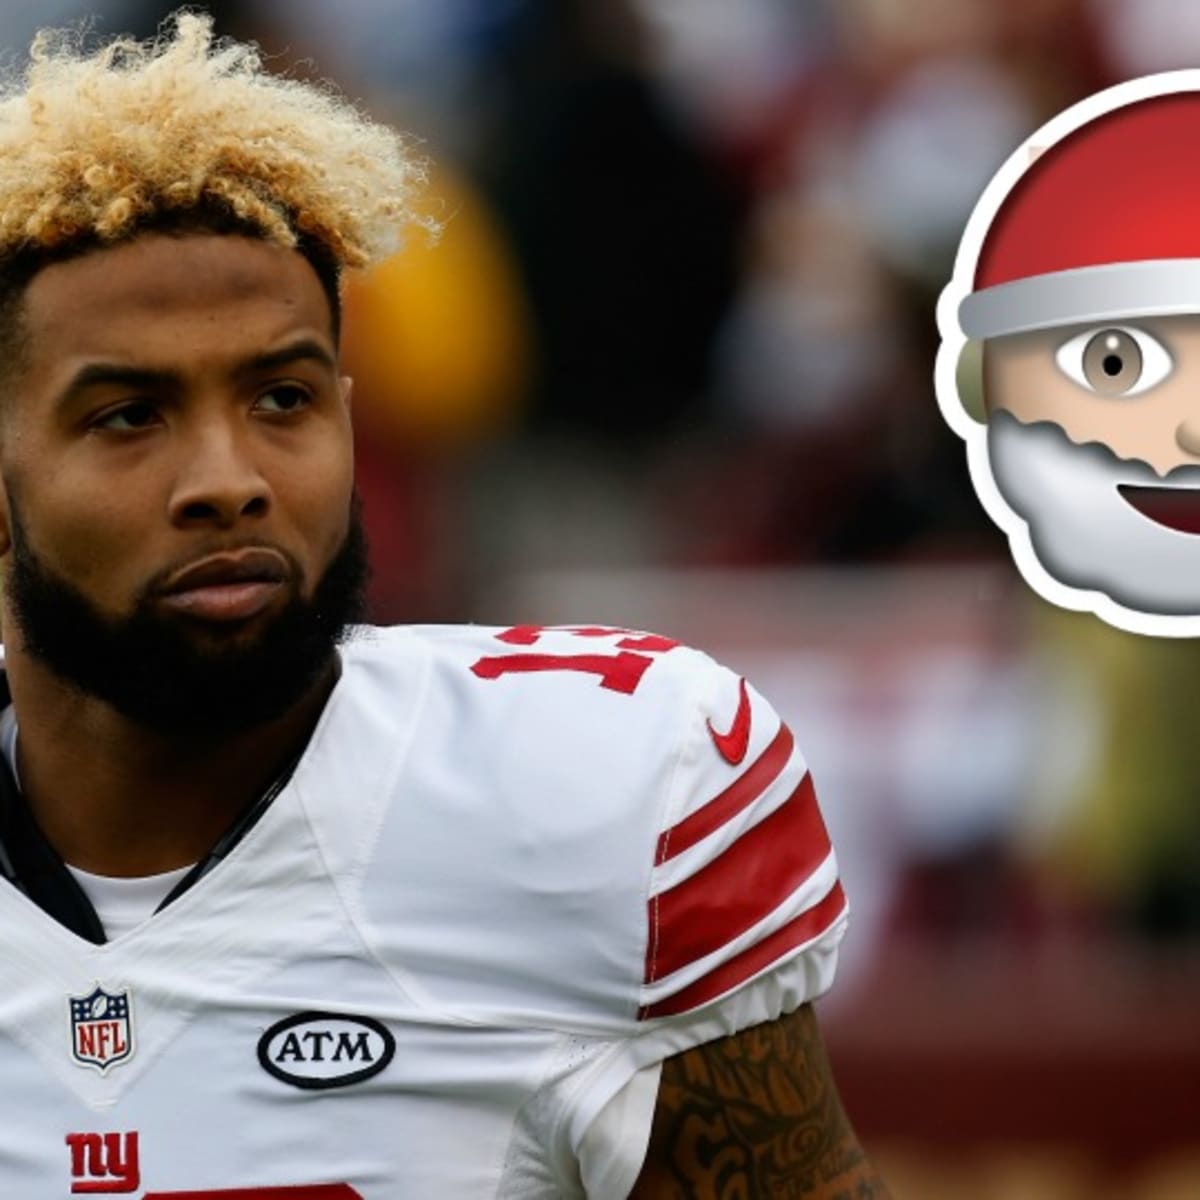 Odell Beckham Jr. fulfills promise to adorable young fan who got his jersey  on Christmas